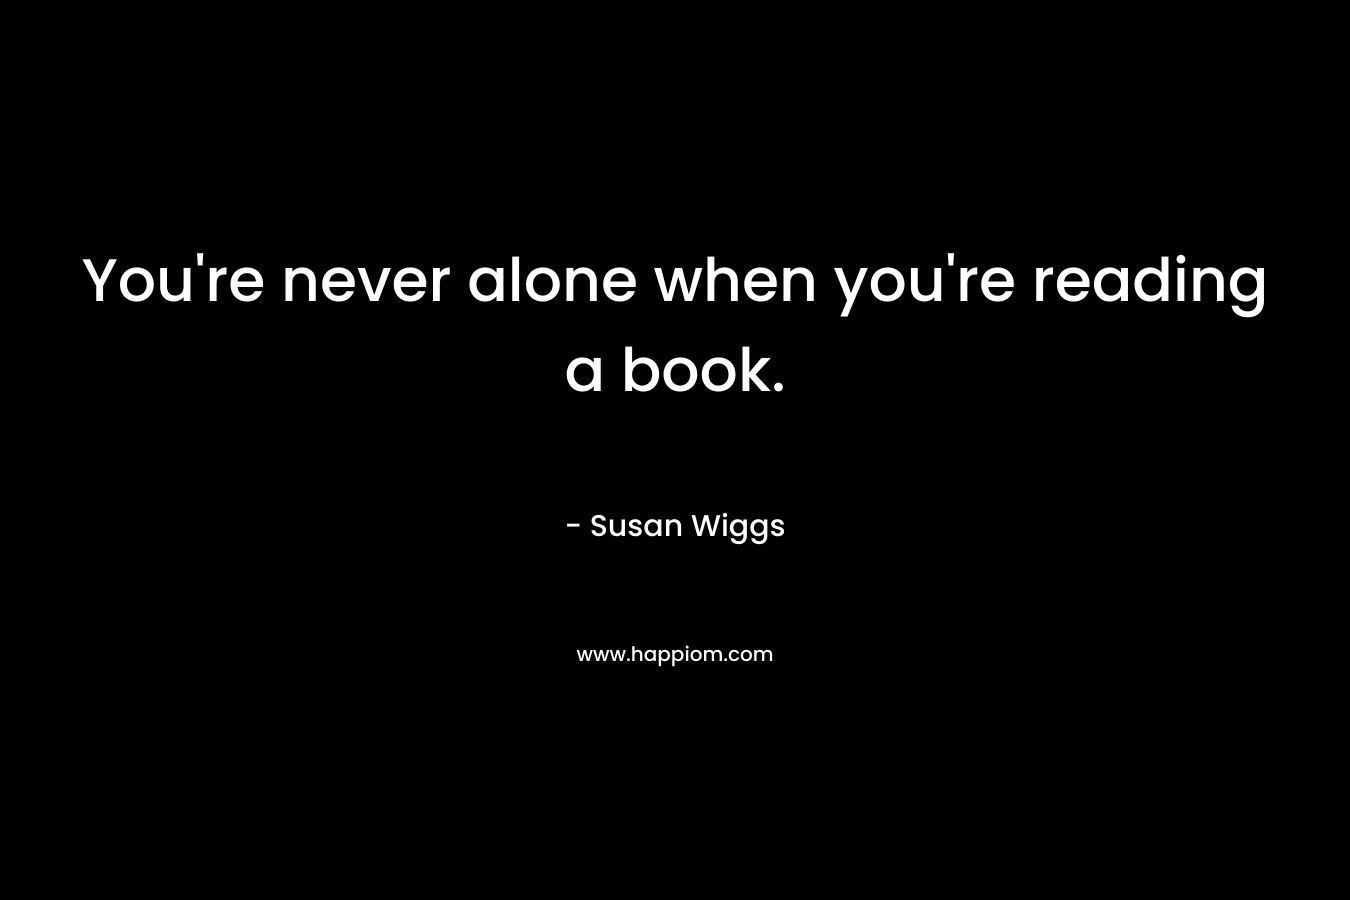 You're never alone when you're reading a book.